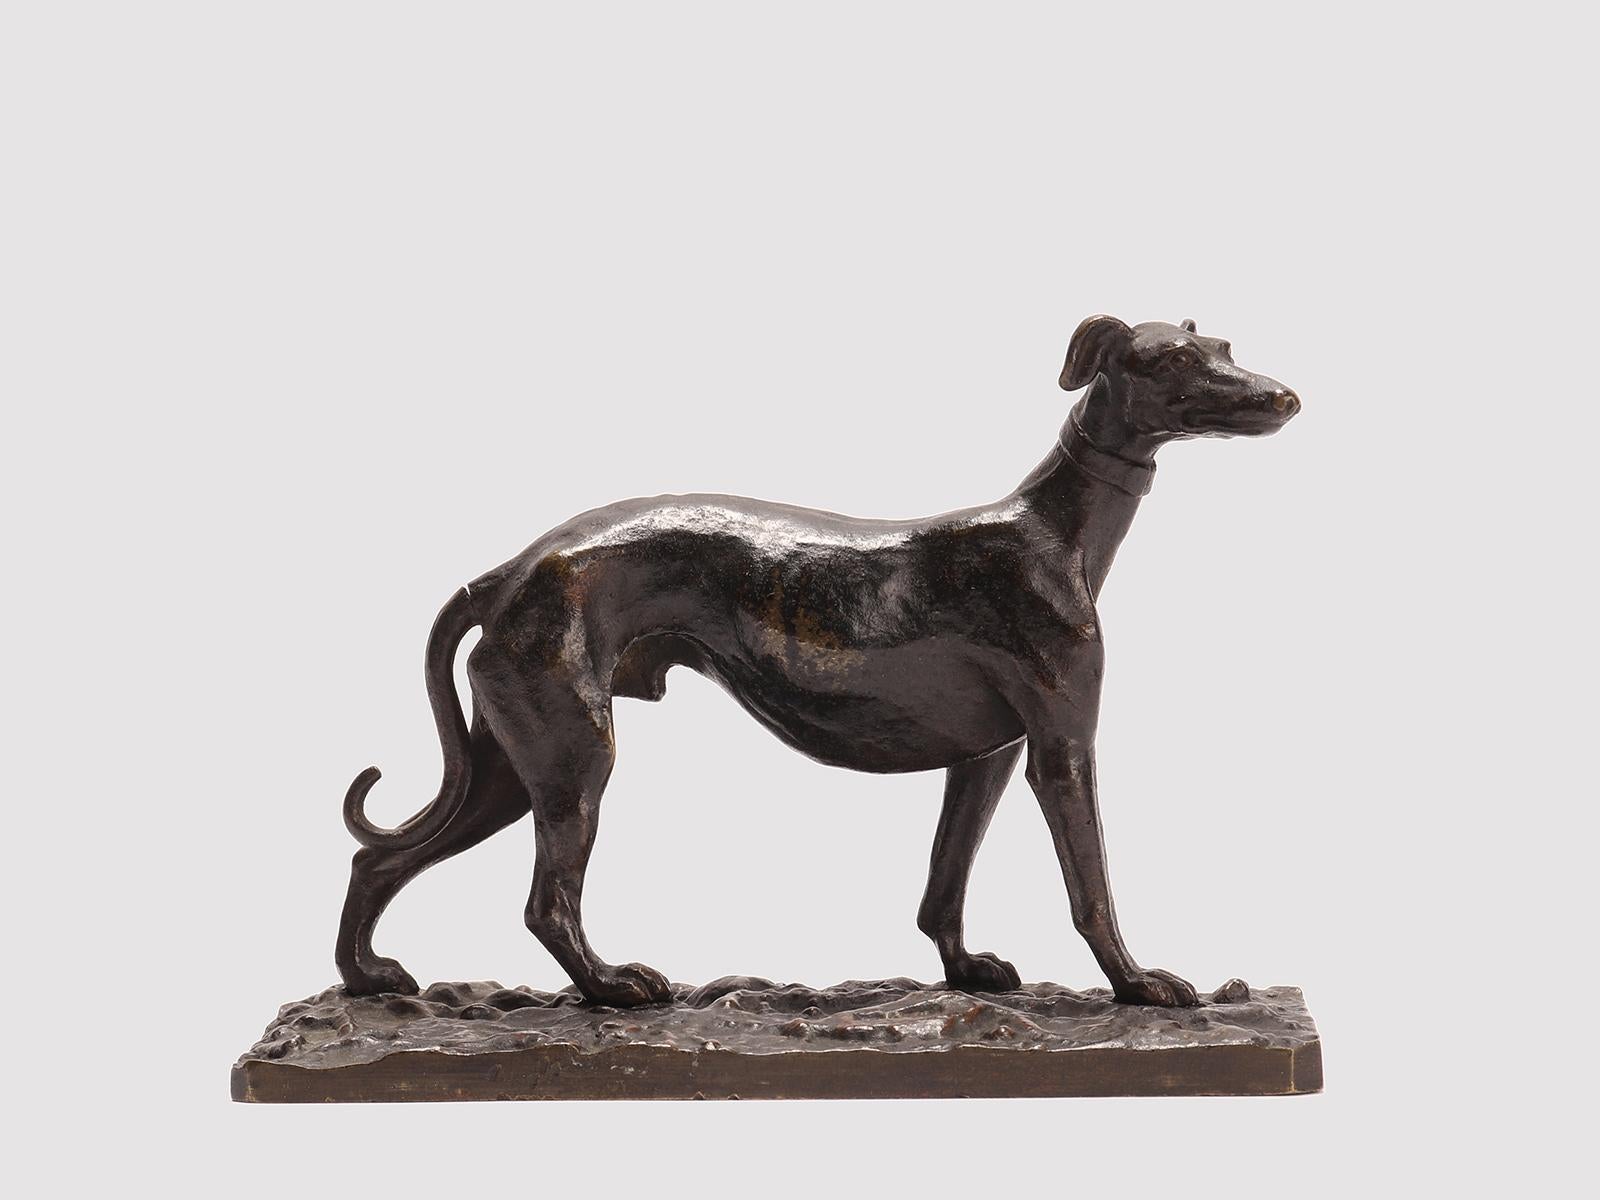 Sculpture of an italian grayhound. Patinated bronze. The moved base is engraved with decorative motives. Original patina. France circa 1880.